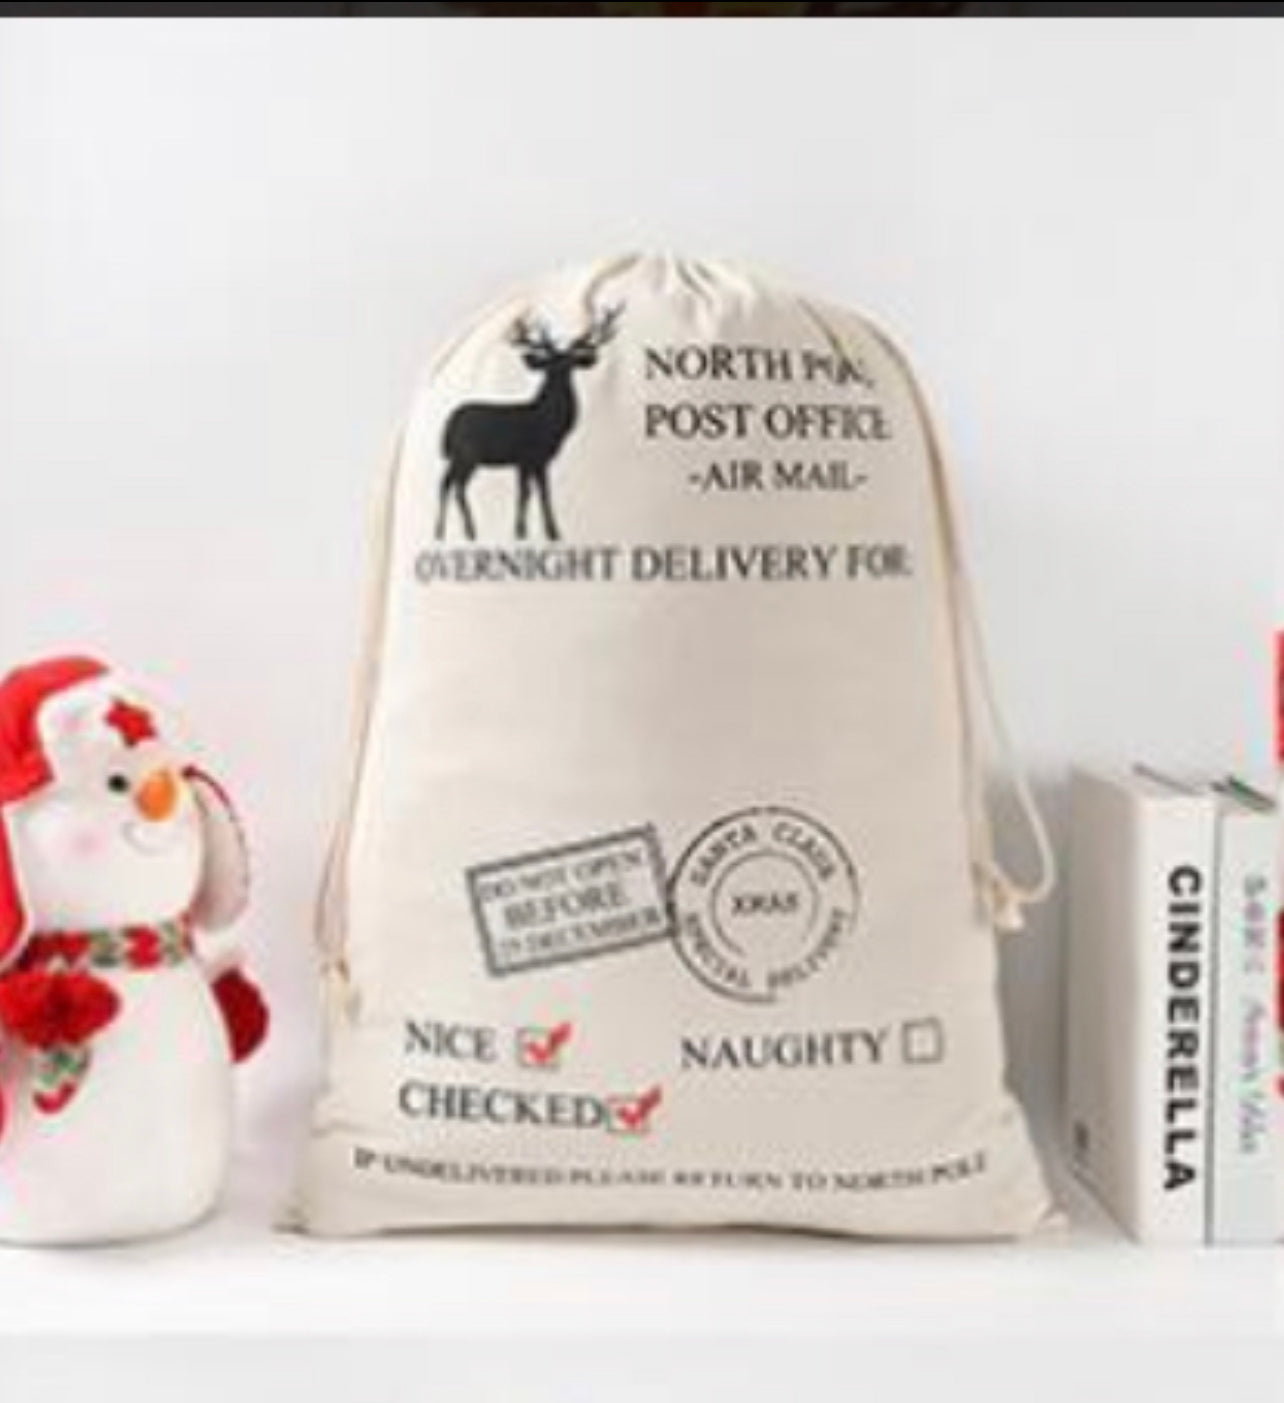 Christmas Sack personalized - Live Shopping Tours